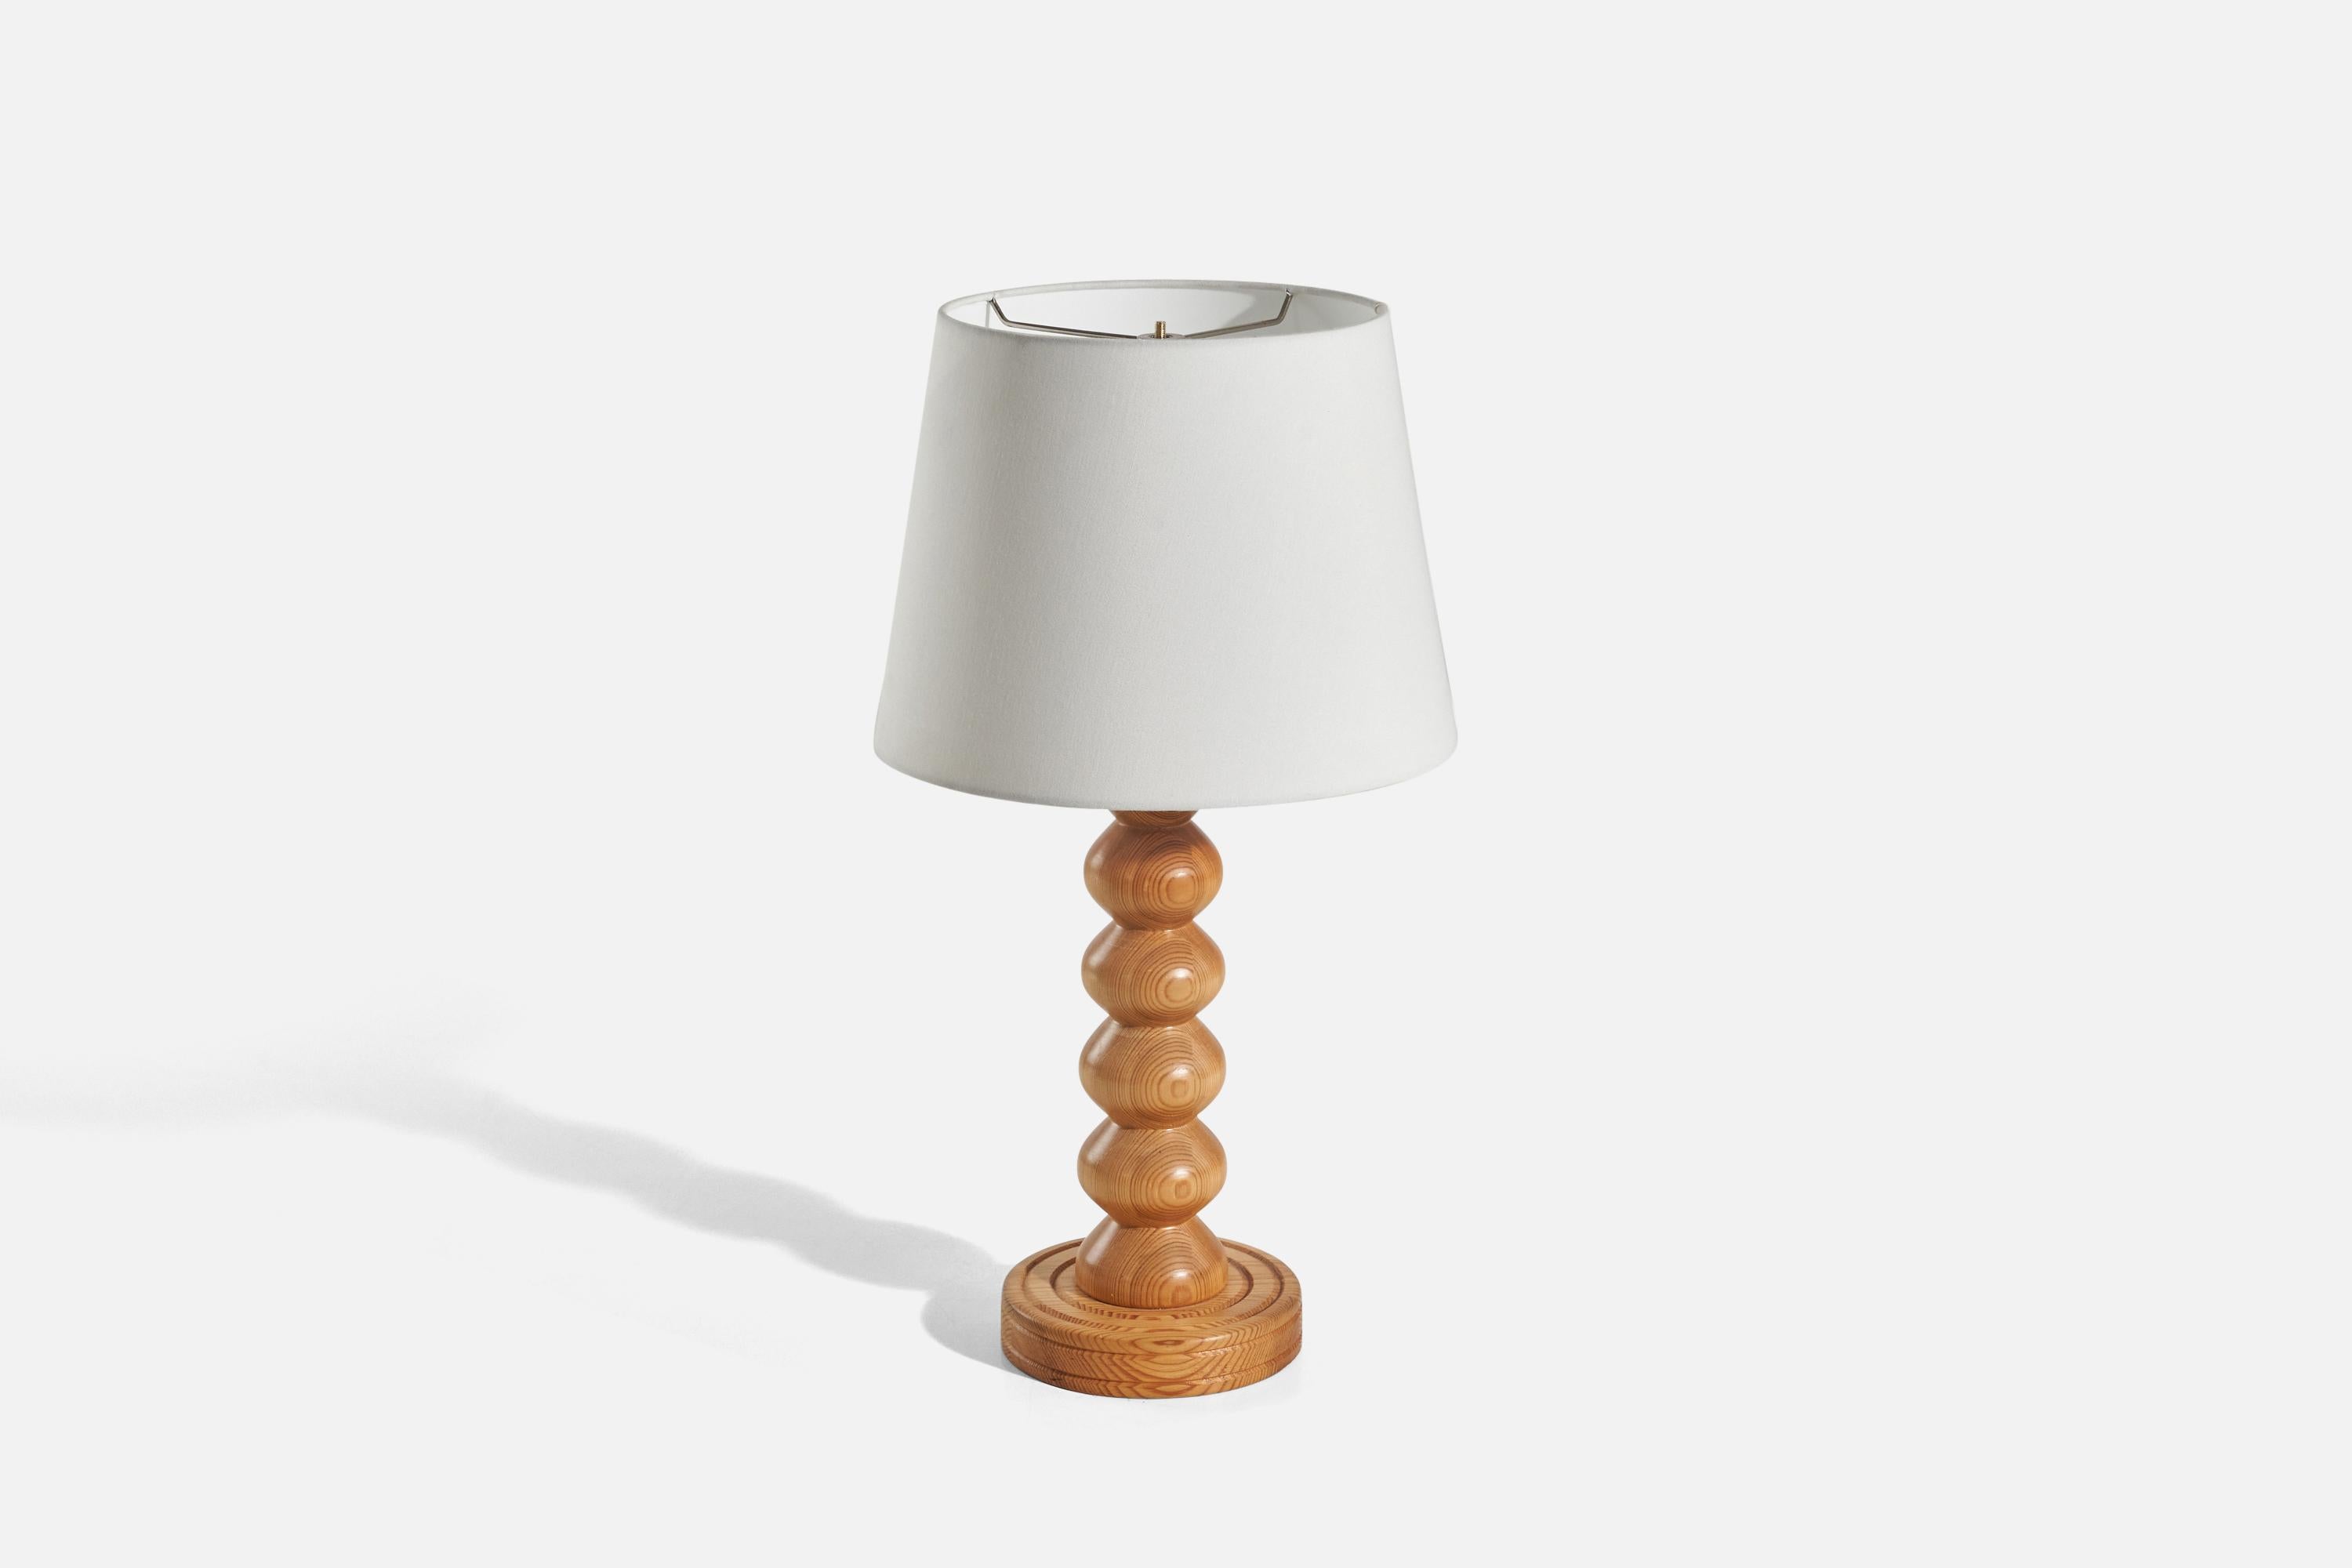 A pine table lamp designed and produced in Sweden, 1978.

Sold without Lampshade(s)
Dimensions of Lamp (inches) : 16.37 x 6.43 x 6.43 (Height x Width x Depth)
Dimensions of Shade (inches) : 9 x 12 x 9 (Top Diameter x Bottom Diameter x